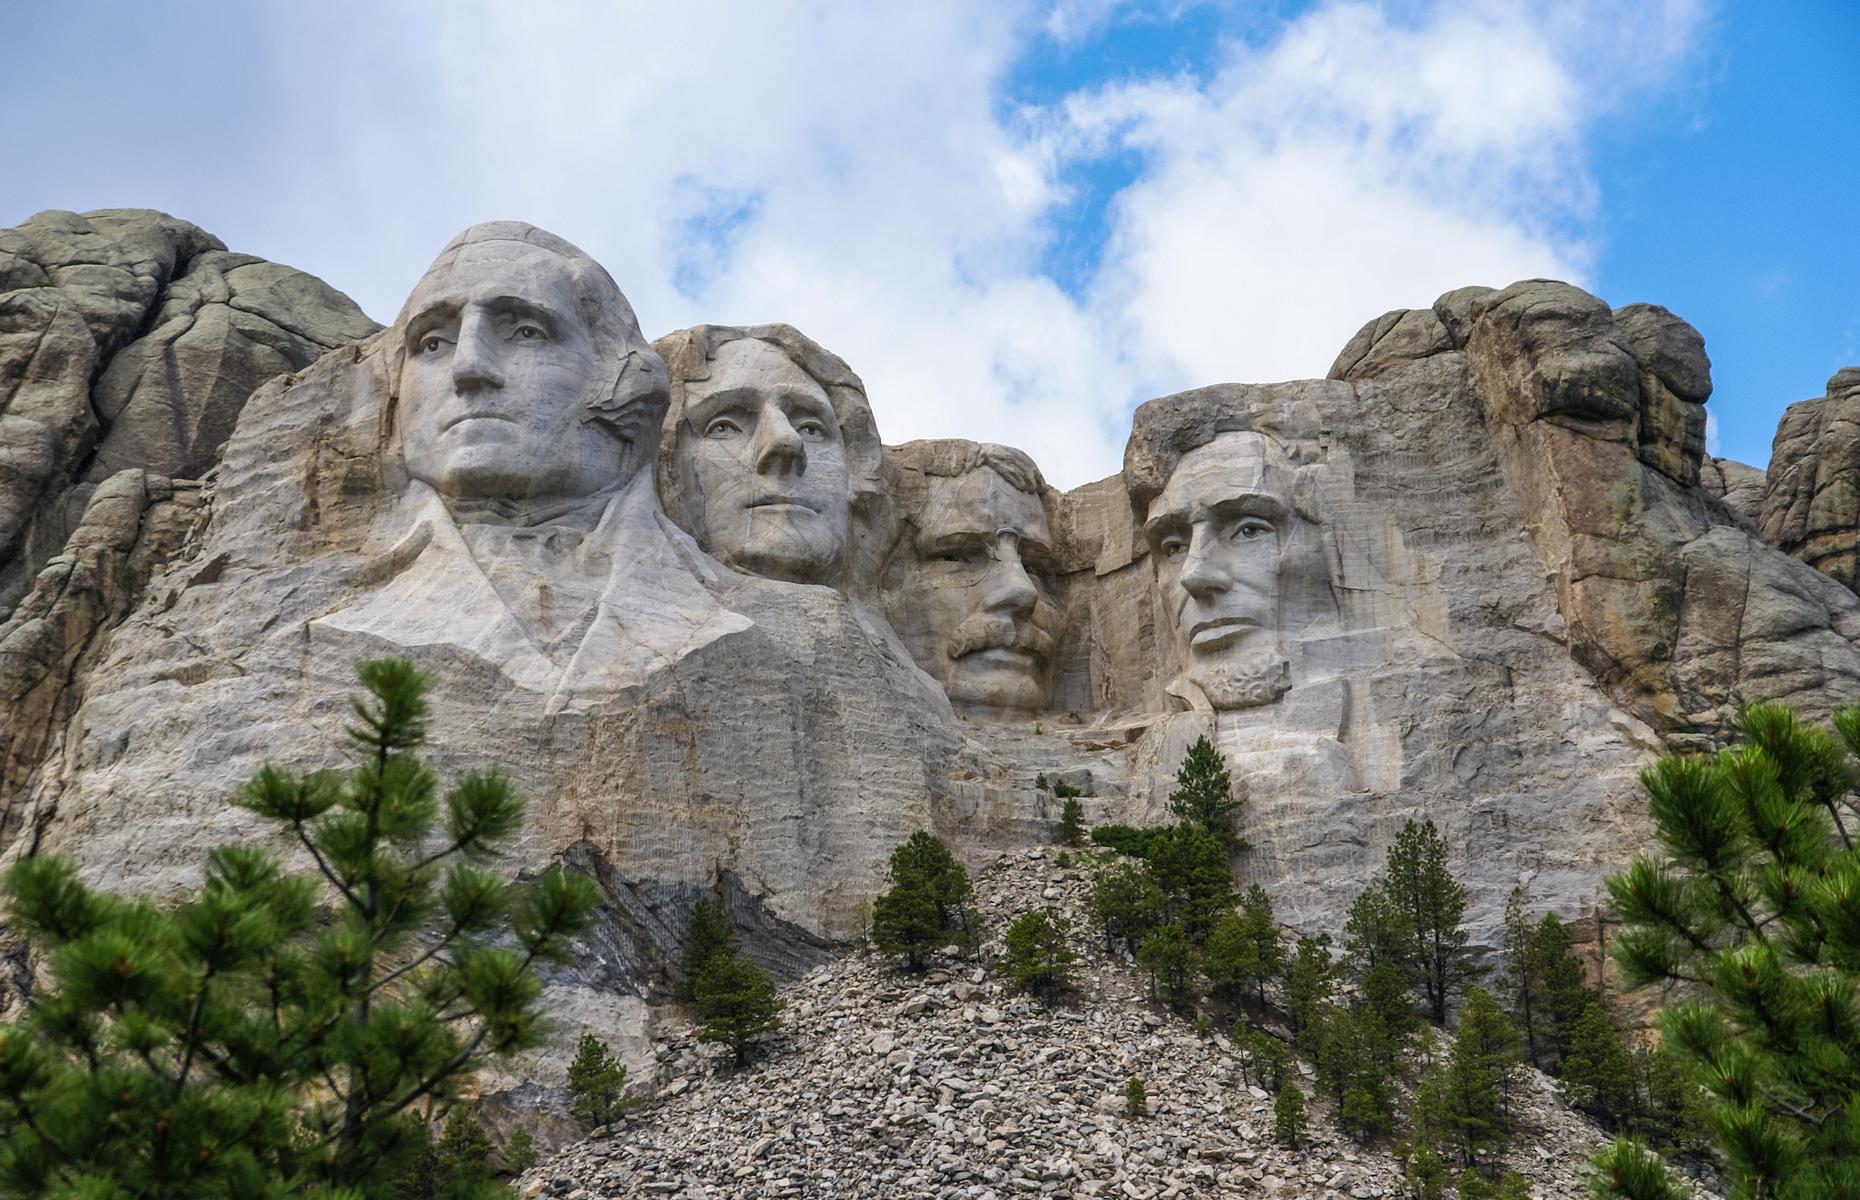 <p>In the craggy Black Hills of South Dakota, not far from the little town of Keystone, you'll find <a href="https://www.nps.gov/moru/index.htm">the faces of four formative American presidents</a> carved into rock. George Washington, Theodore Roosevelt, Thomas Jefferson and Abraham Lincoln stare out from the stone at the Mount Rushmore National Memorial, and have done since 1941 when the mammoth project was completed. The hulking heads are each around 60-feet (18m) tall and you can view them best along the short Presidential Trail (be aware that the route includes 422 stairs). </p>